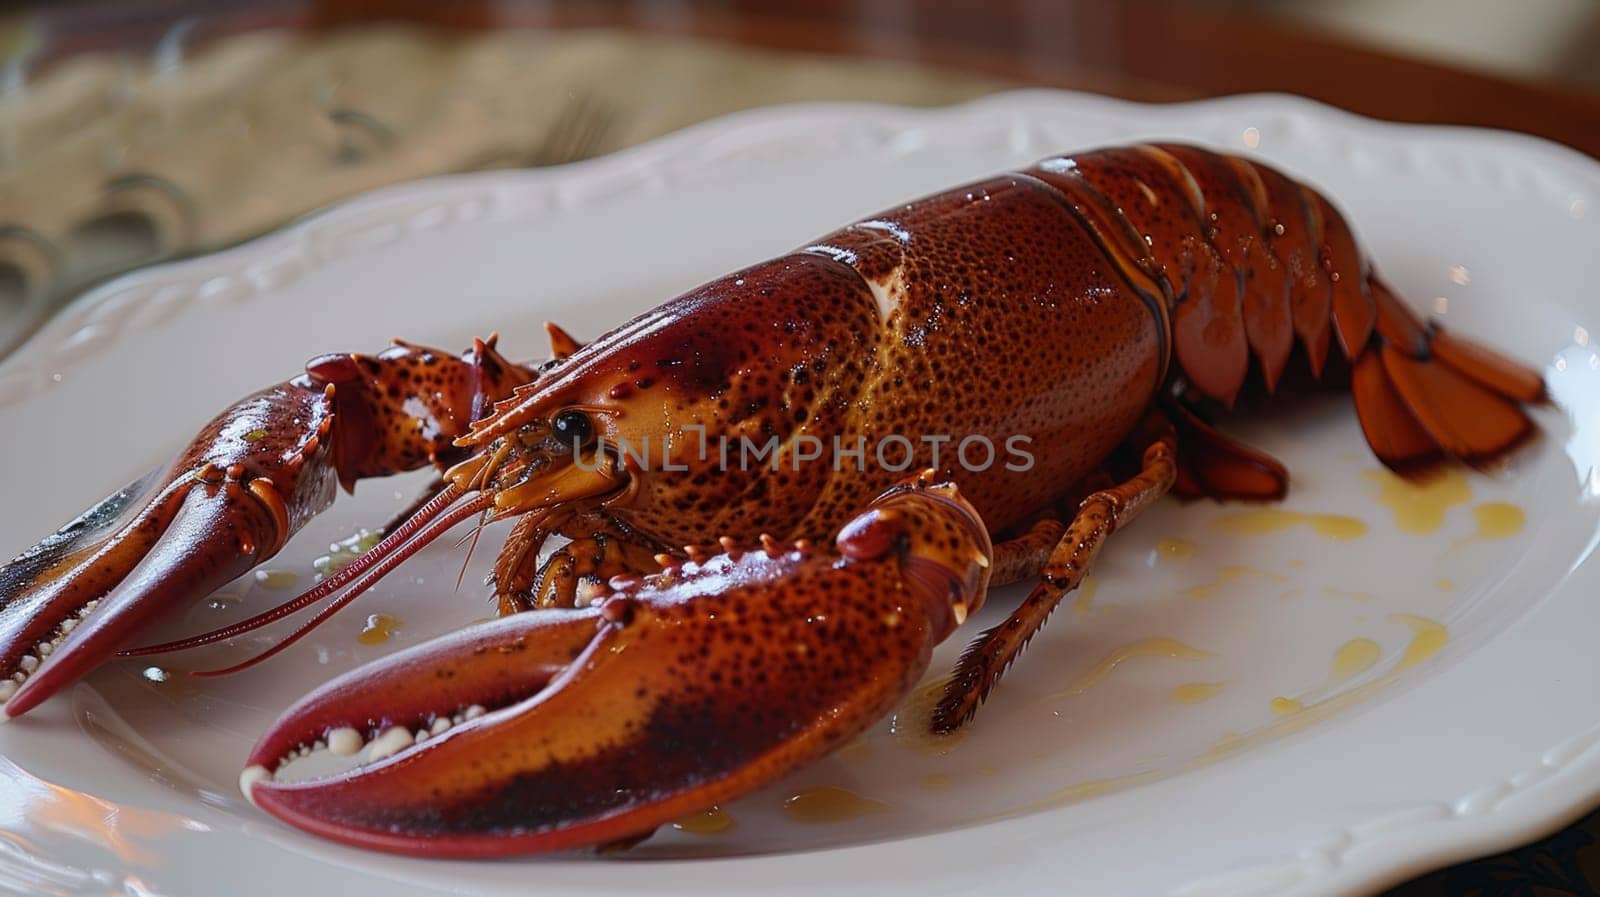 A large lobster sitting on a white plate with some sauce, AI by starush